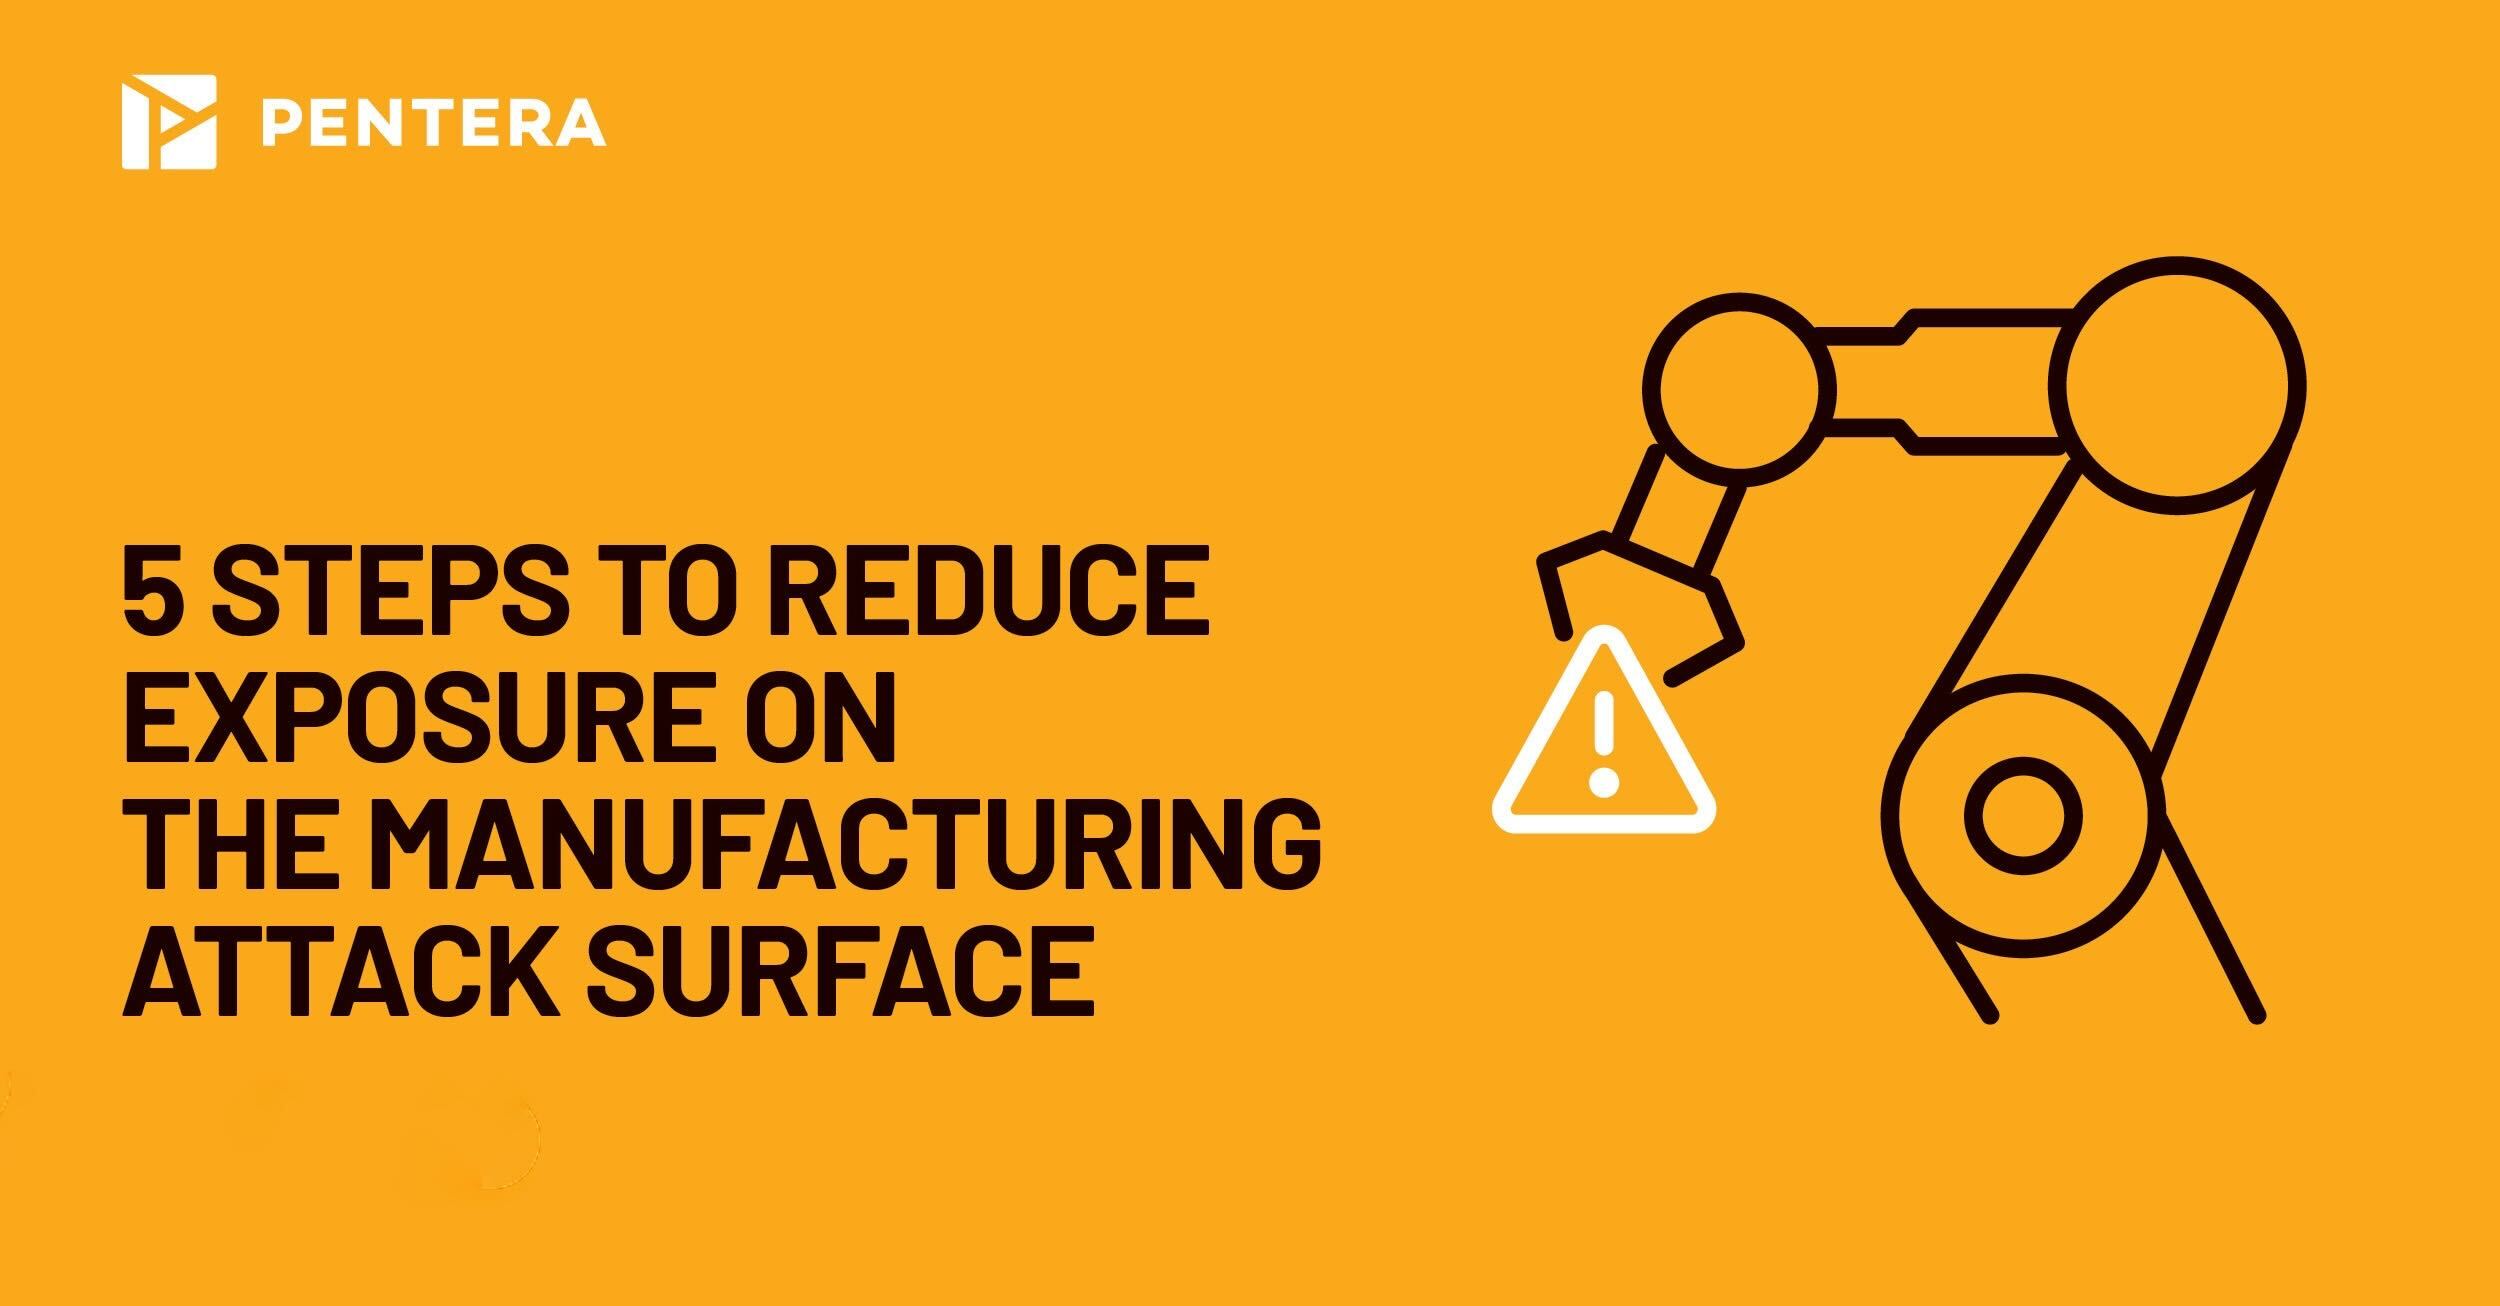 How to reduce exposure on the manufacturing attack surface